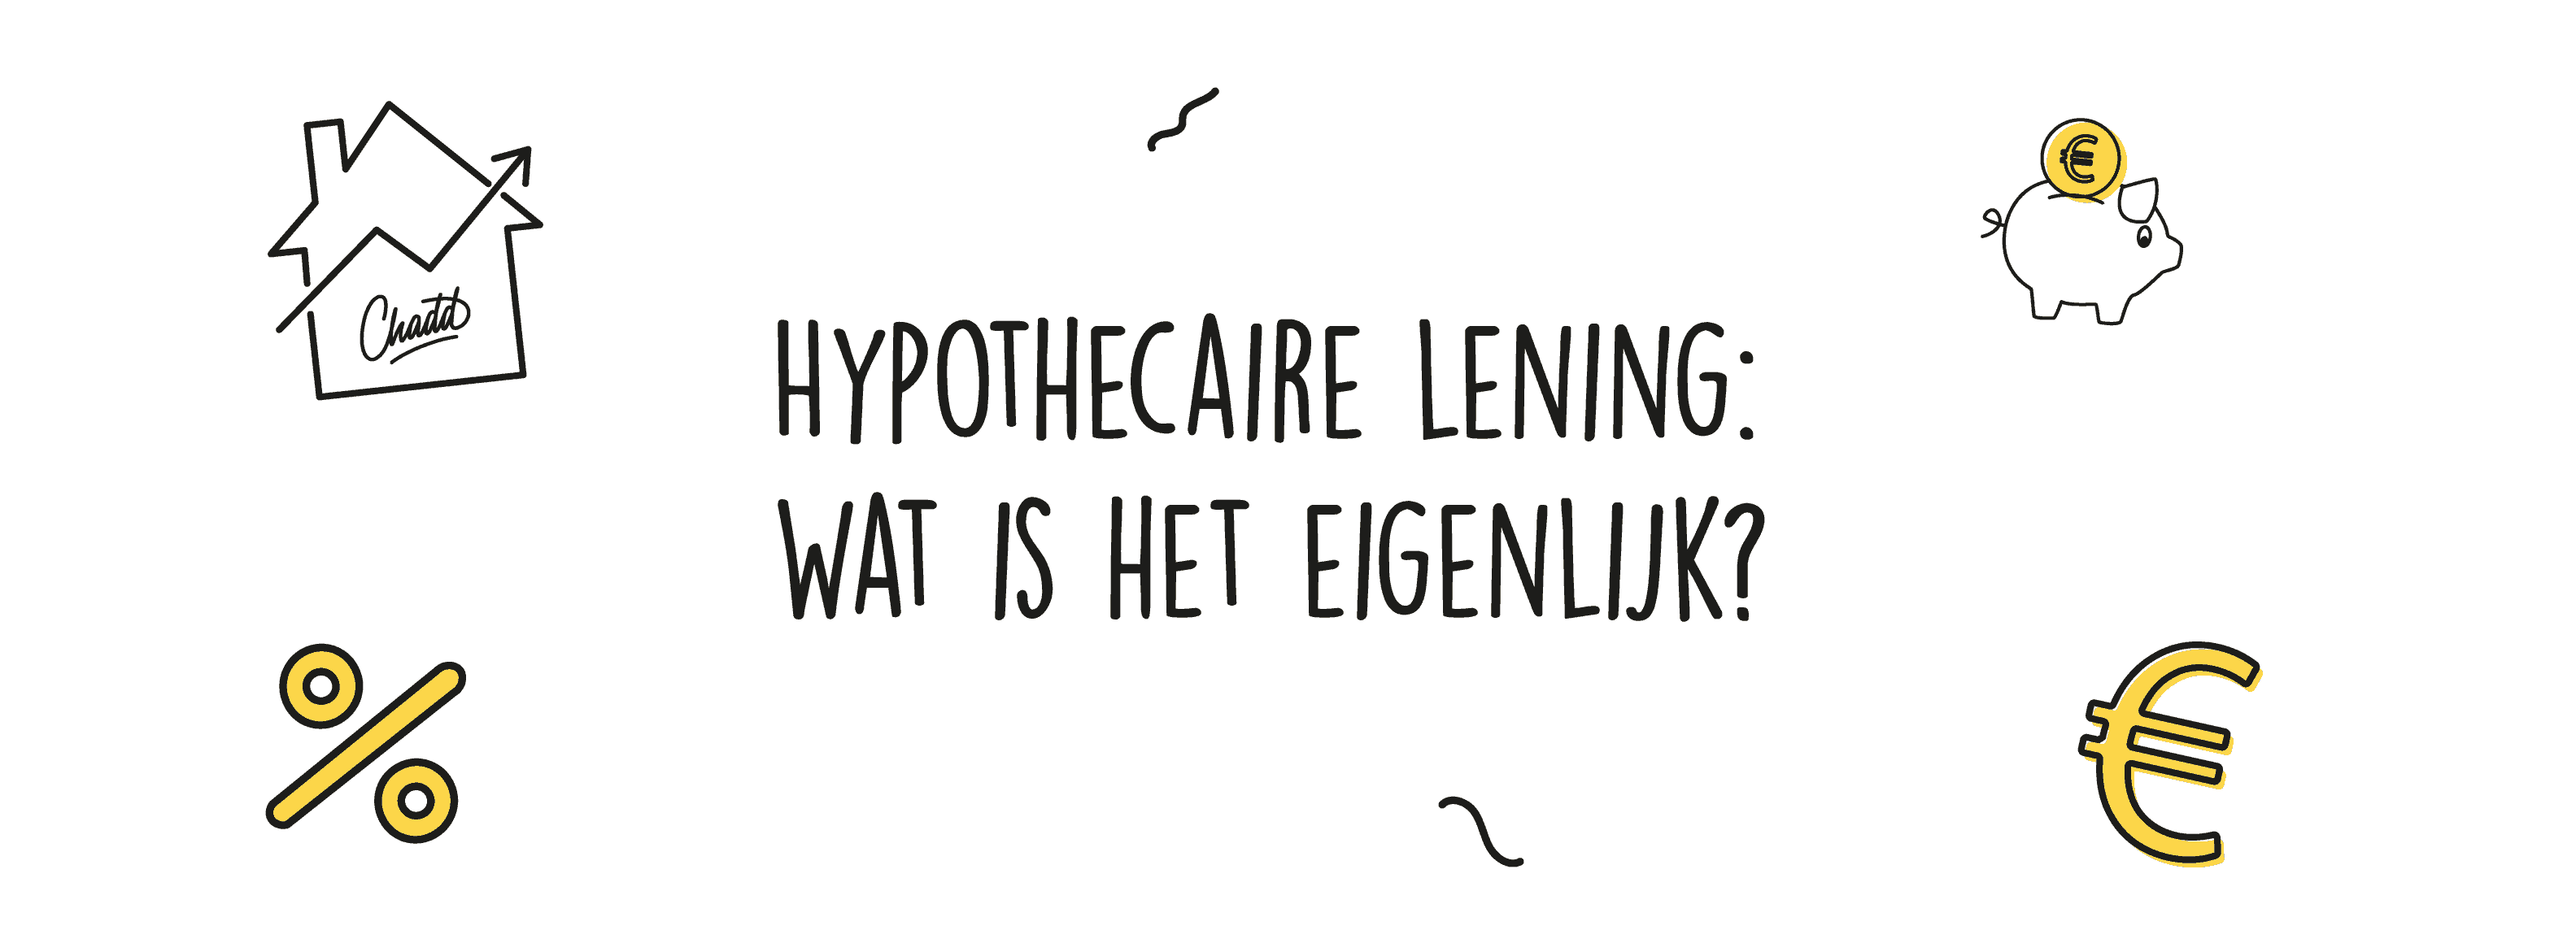 Hypothecaire lening